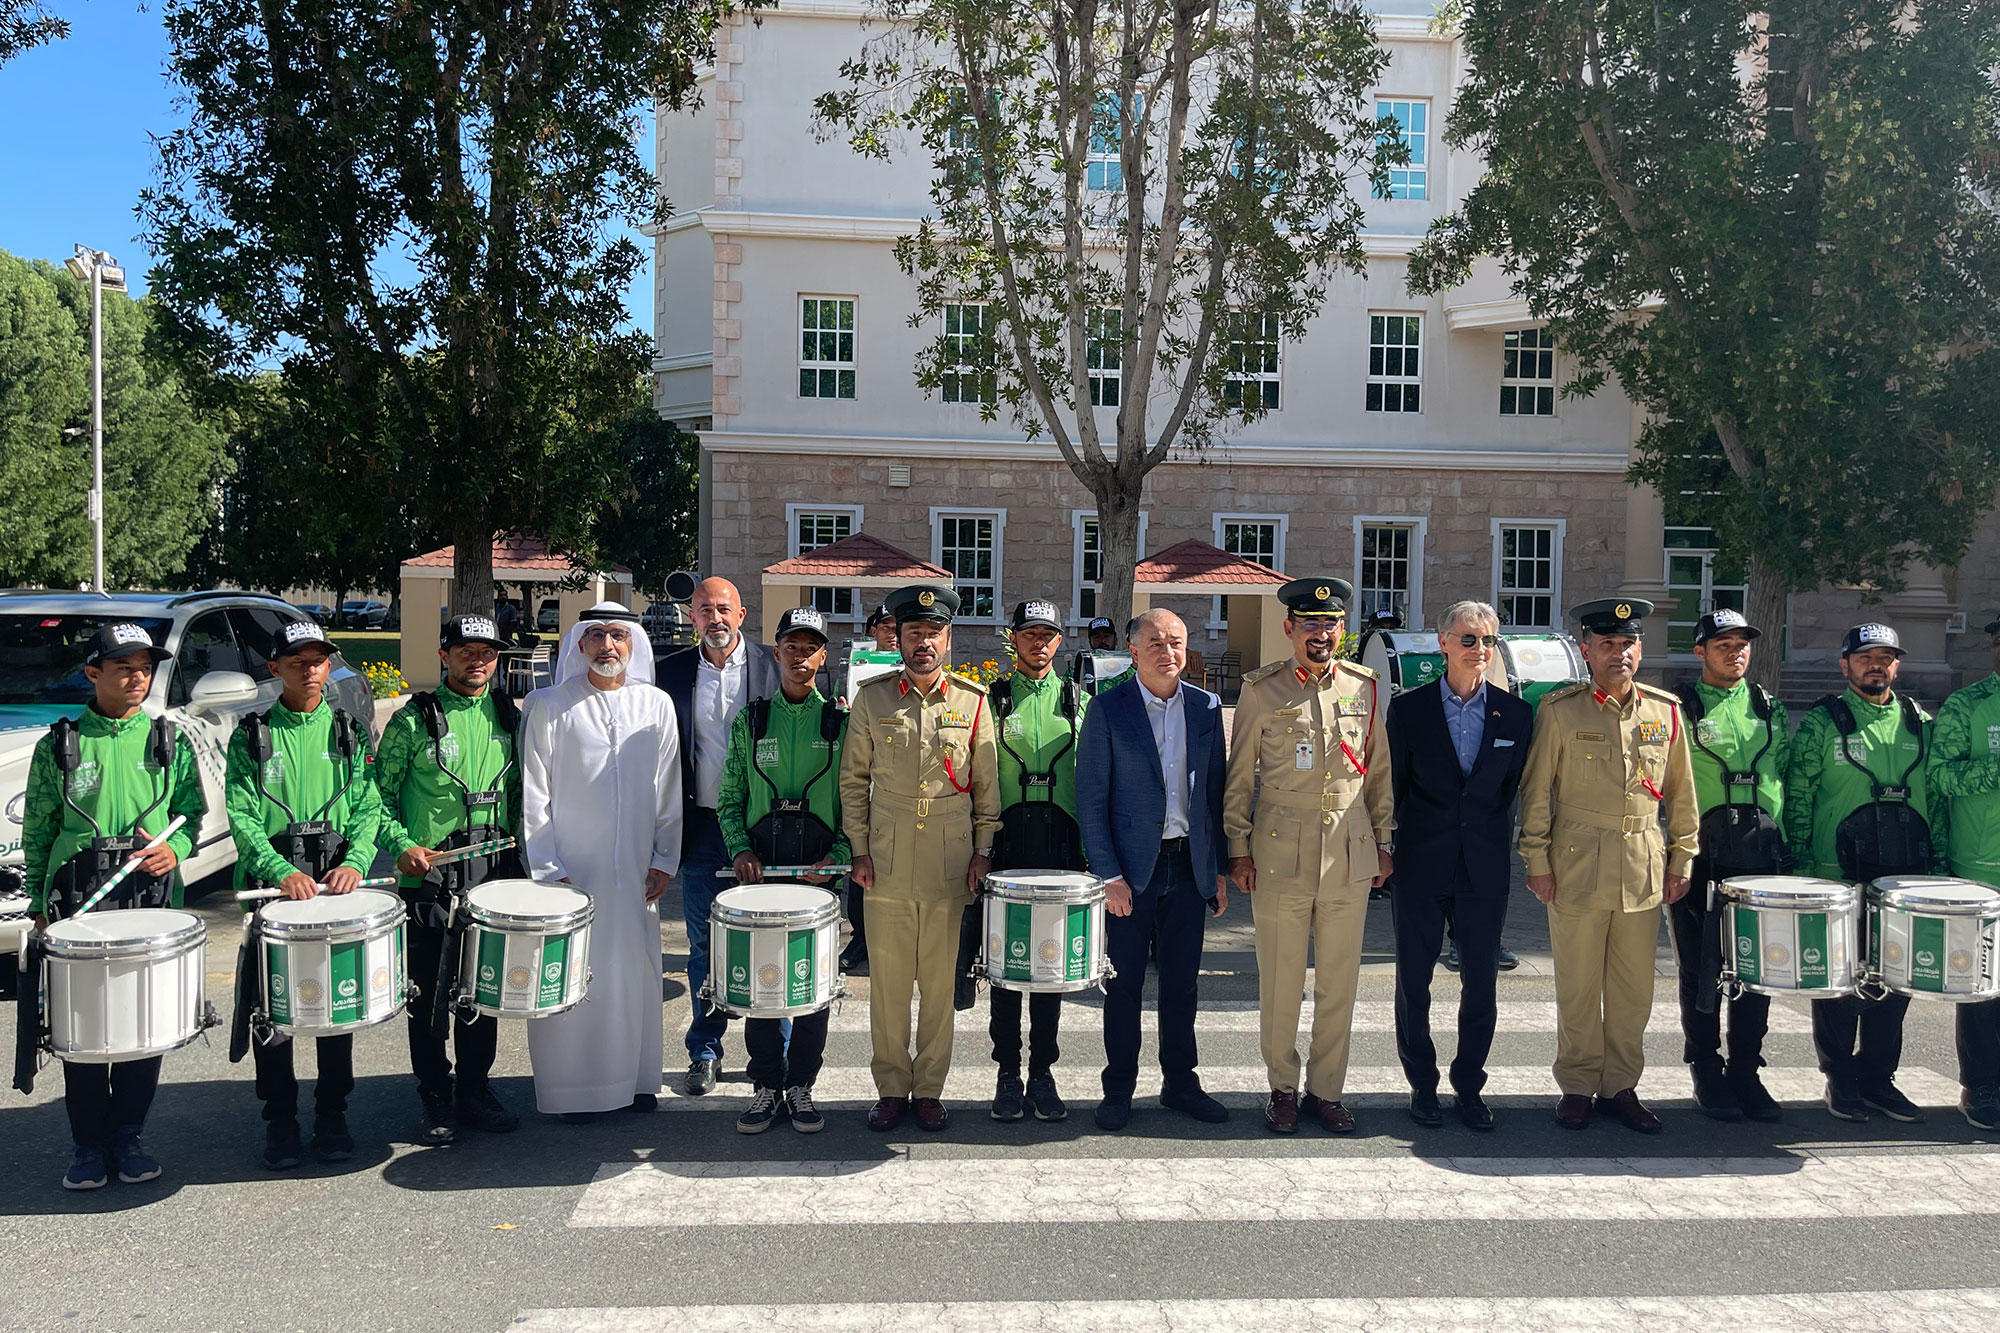 Dubai Police implements the "Protect Yourself" campaign in AUD